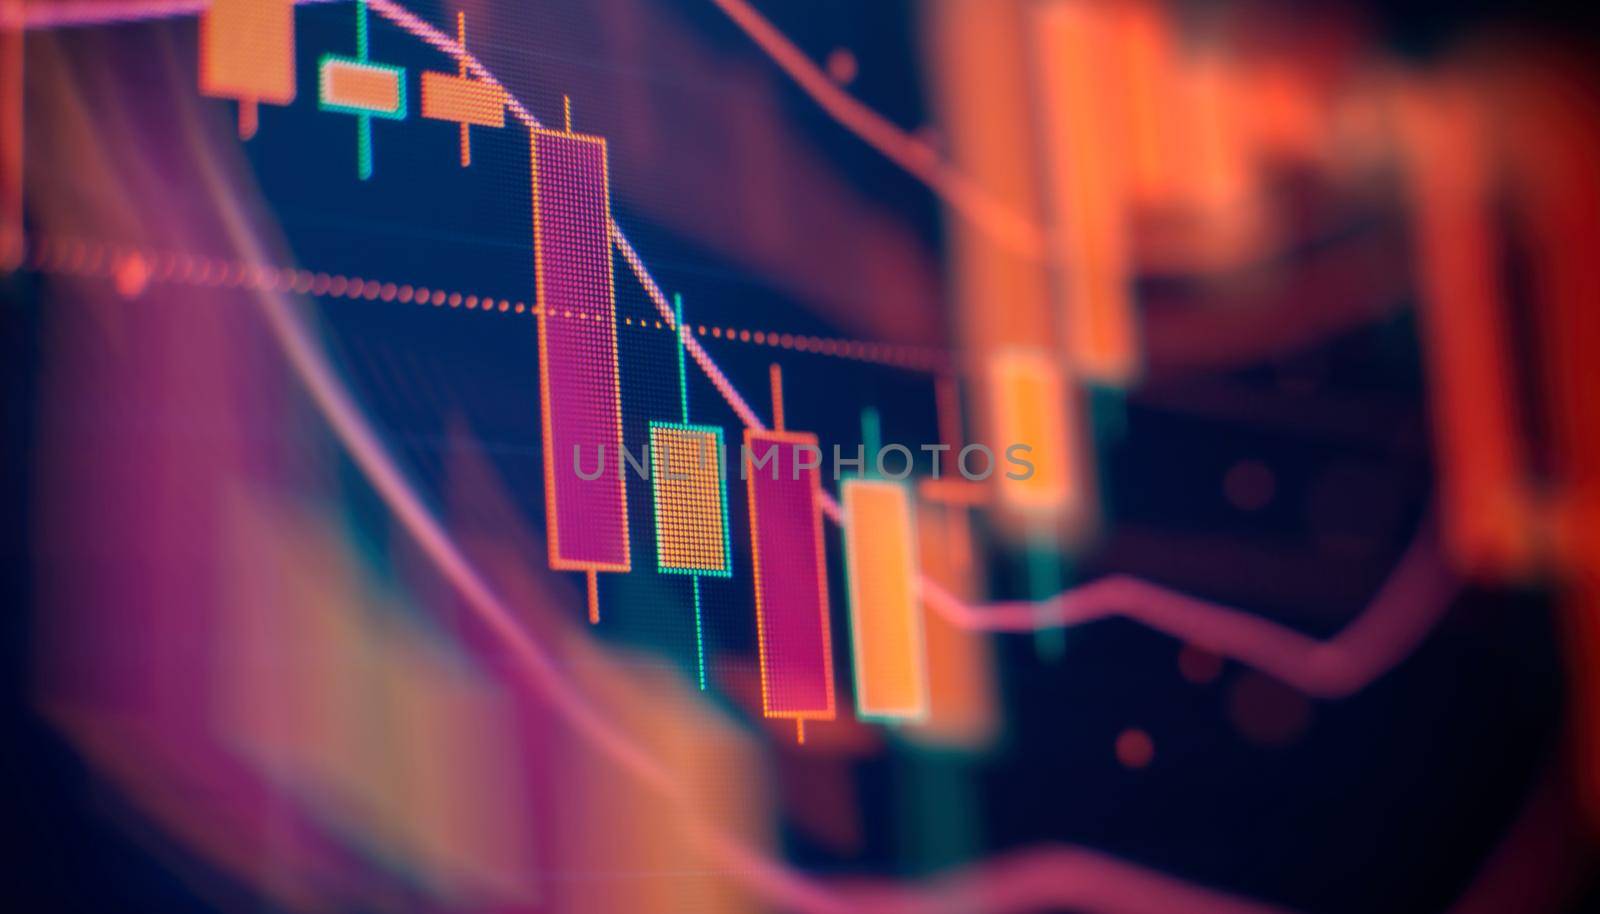 Stock exchange business screen data graph background. Background with currency bars and candles